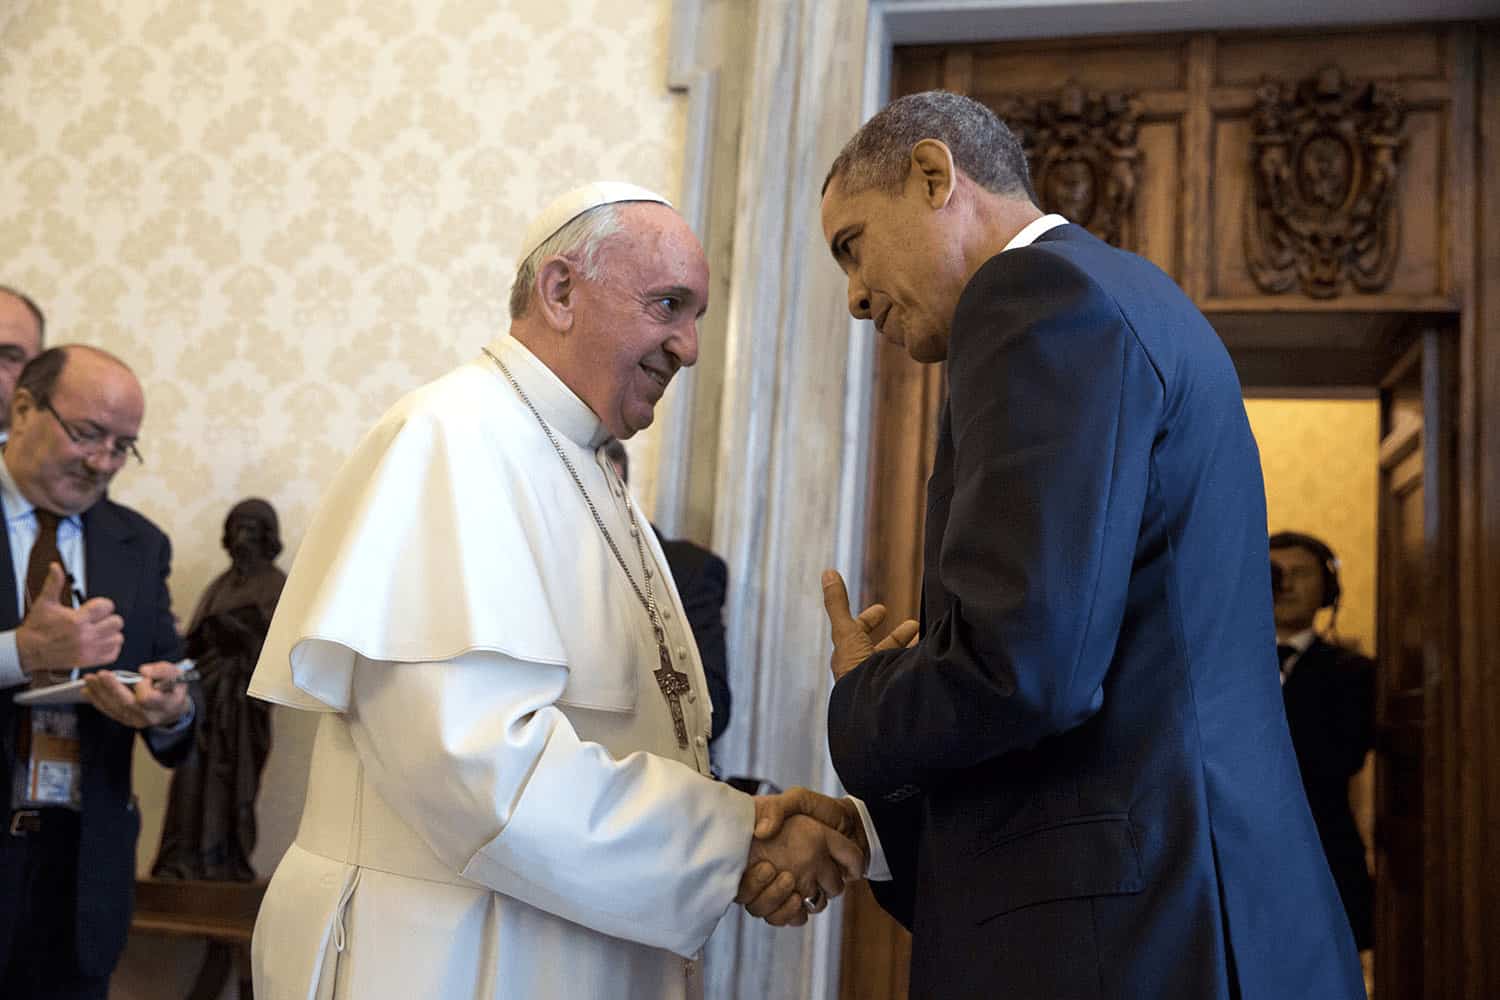 President Obama and Pope Francis at the Vatican | Official White House Photo | Obama White House Archives